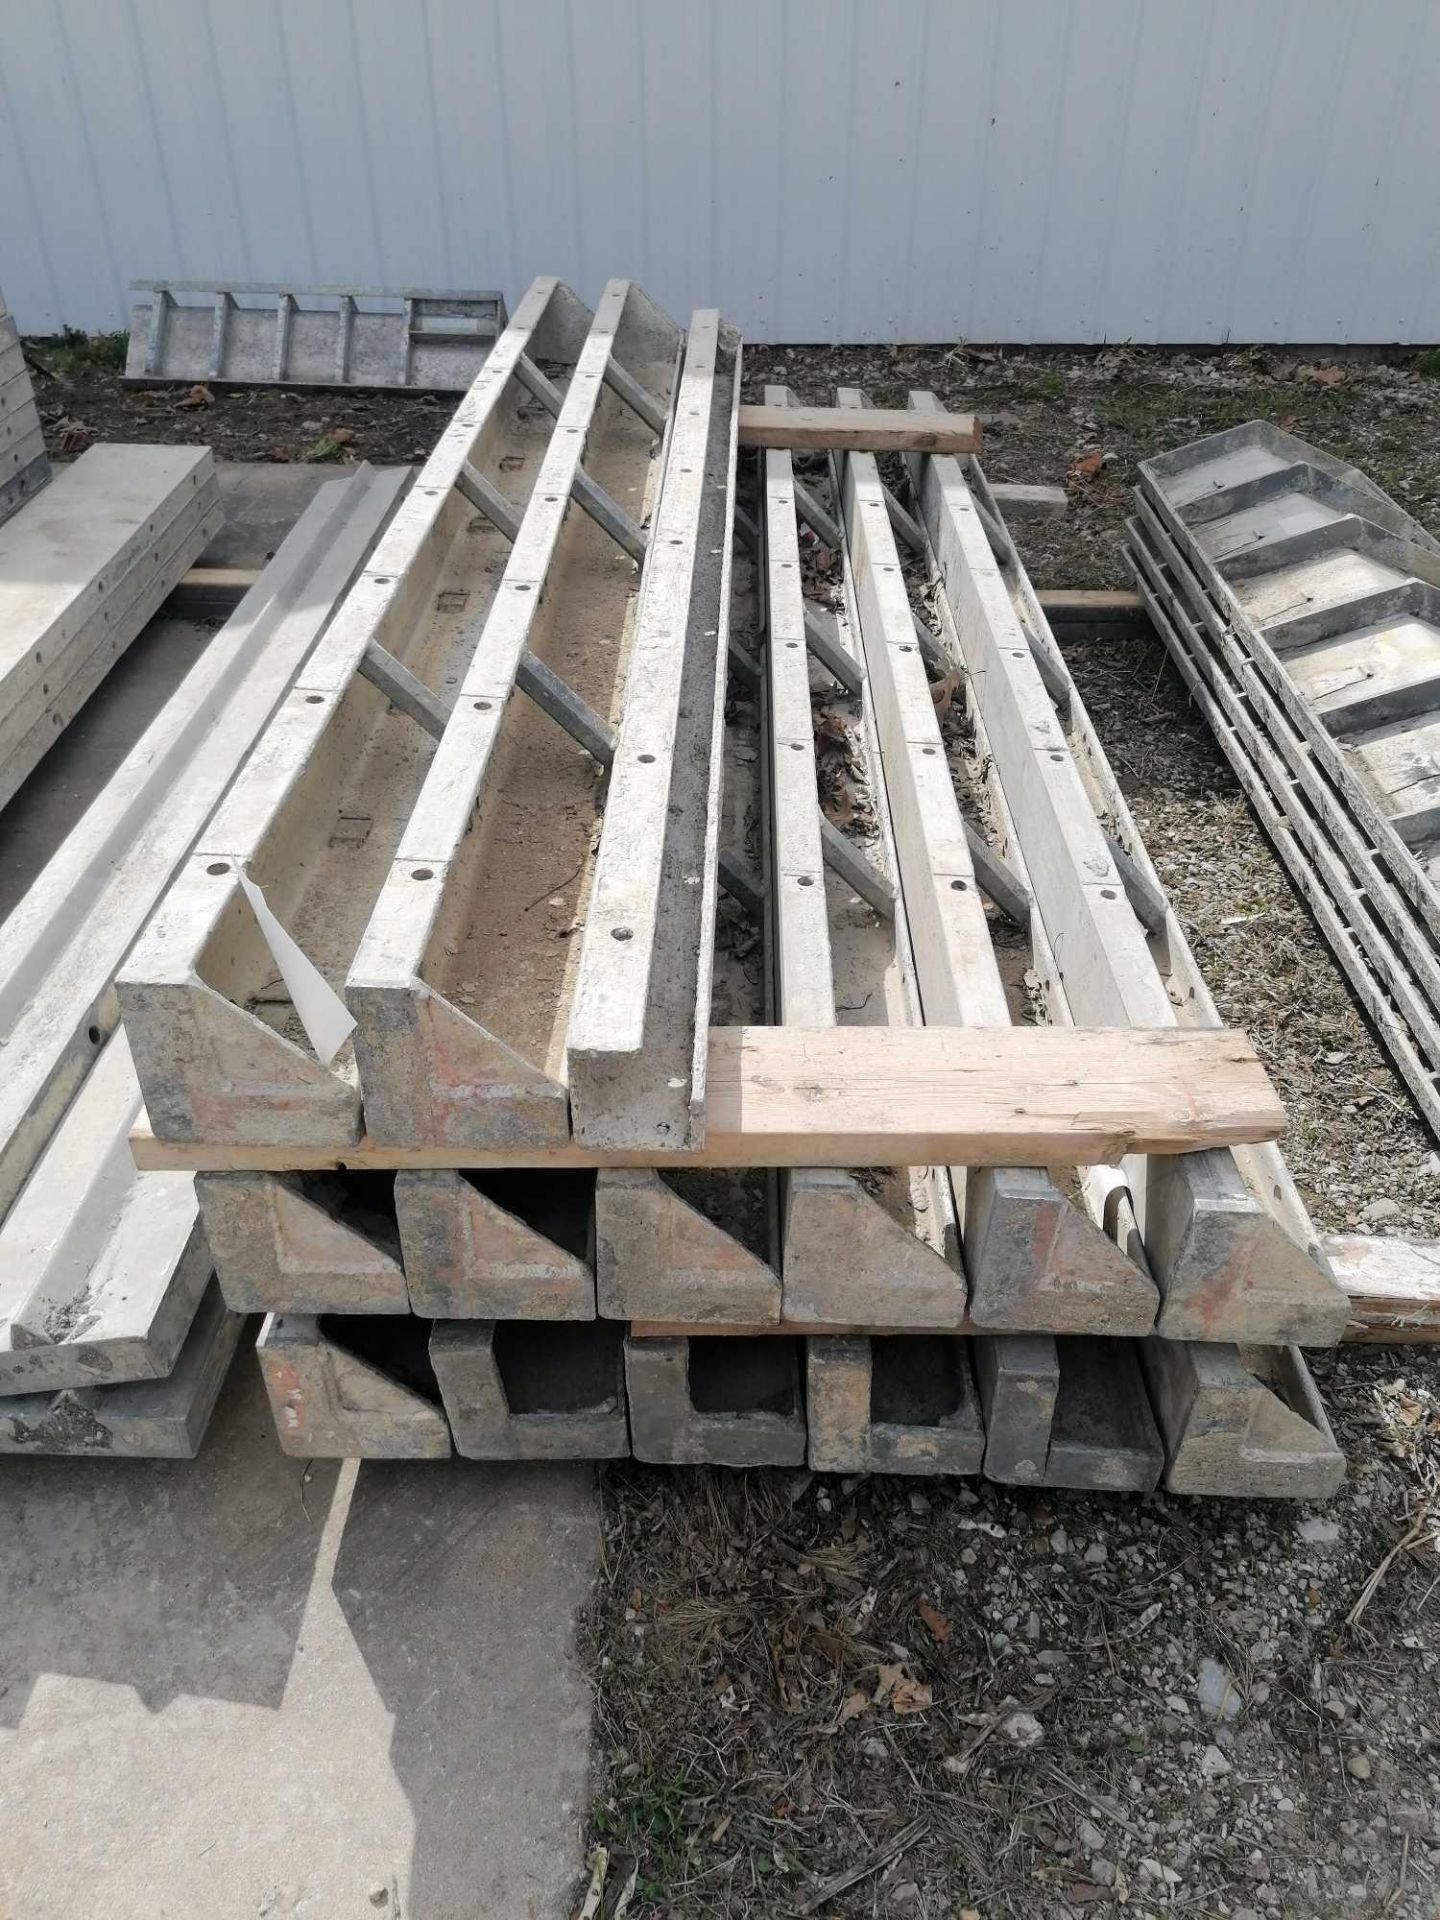 (14) 6" x 6" x 8' & (1) 4" x 4" x 8" ISC Durand Aluminum Concrete Forms, Smooth 6-12 Hole Pattern.